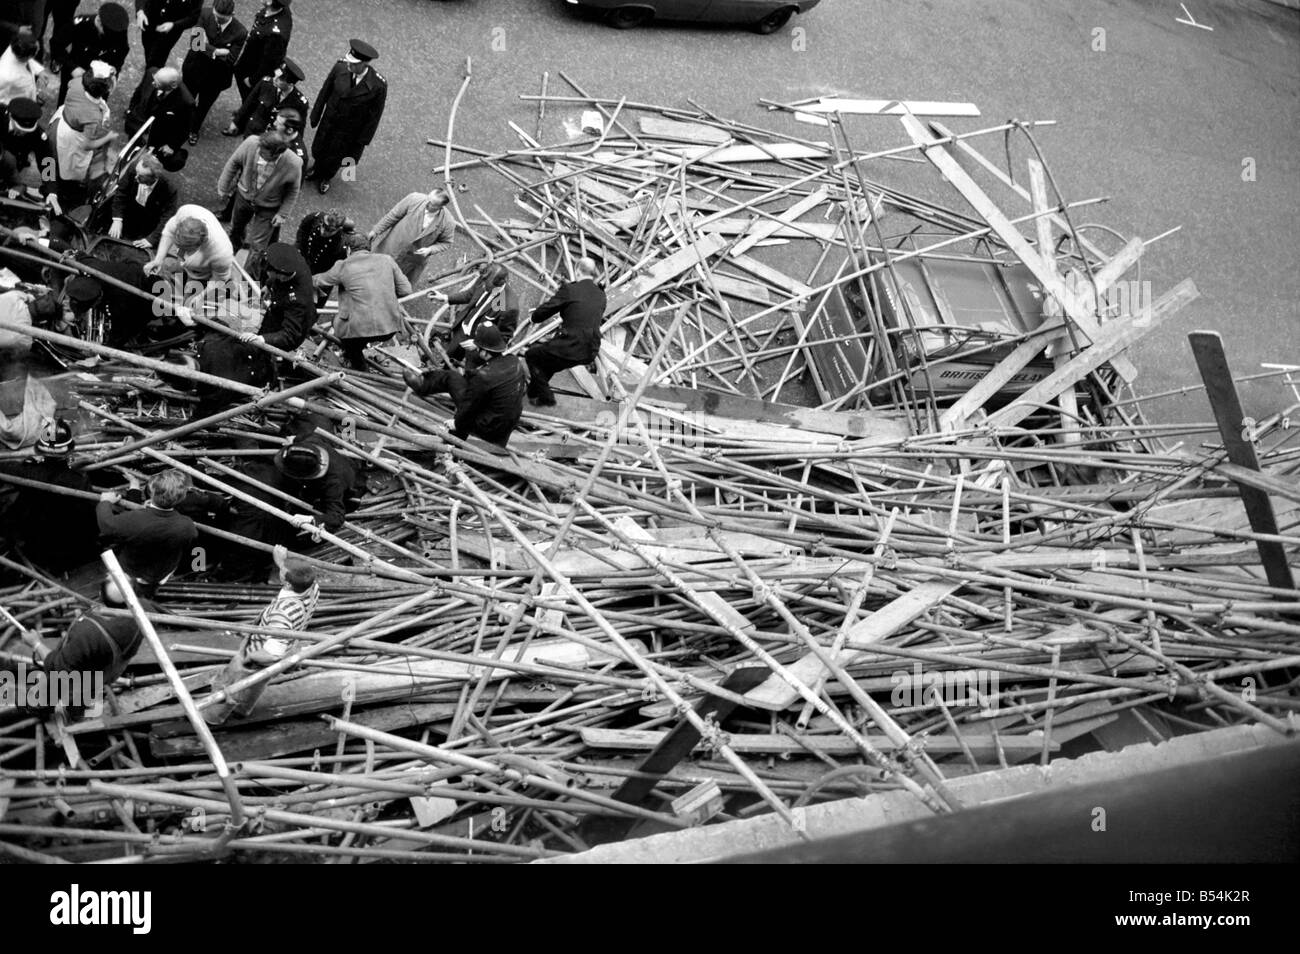 Police and fireman swarm at the scene where a 100ft framework of Scaffolding collapsed on to a Daimler limousine, killing Sir David Rose, Governor General of Guyana. ;November 1969 ;Z10837-001 Stock Photo